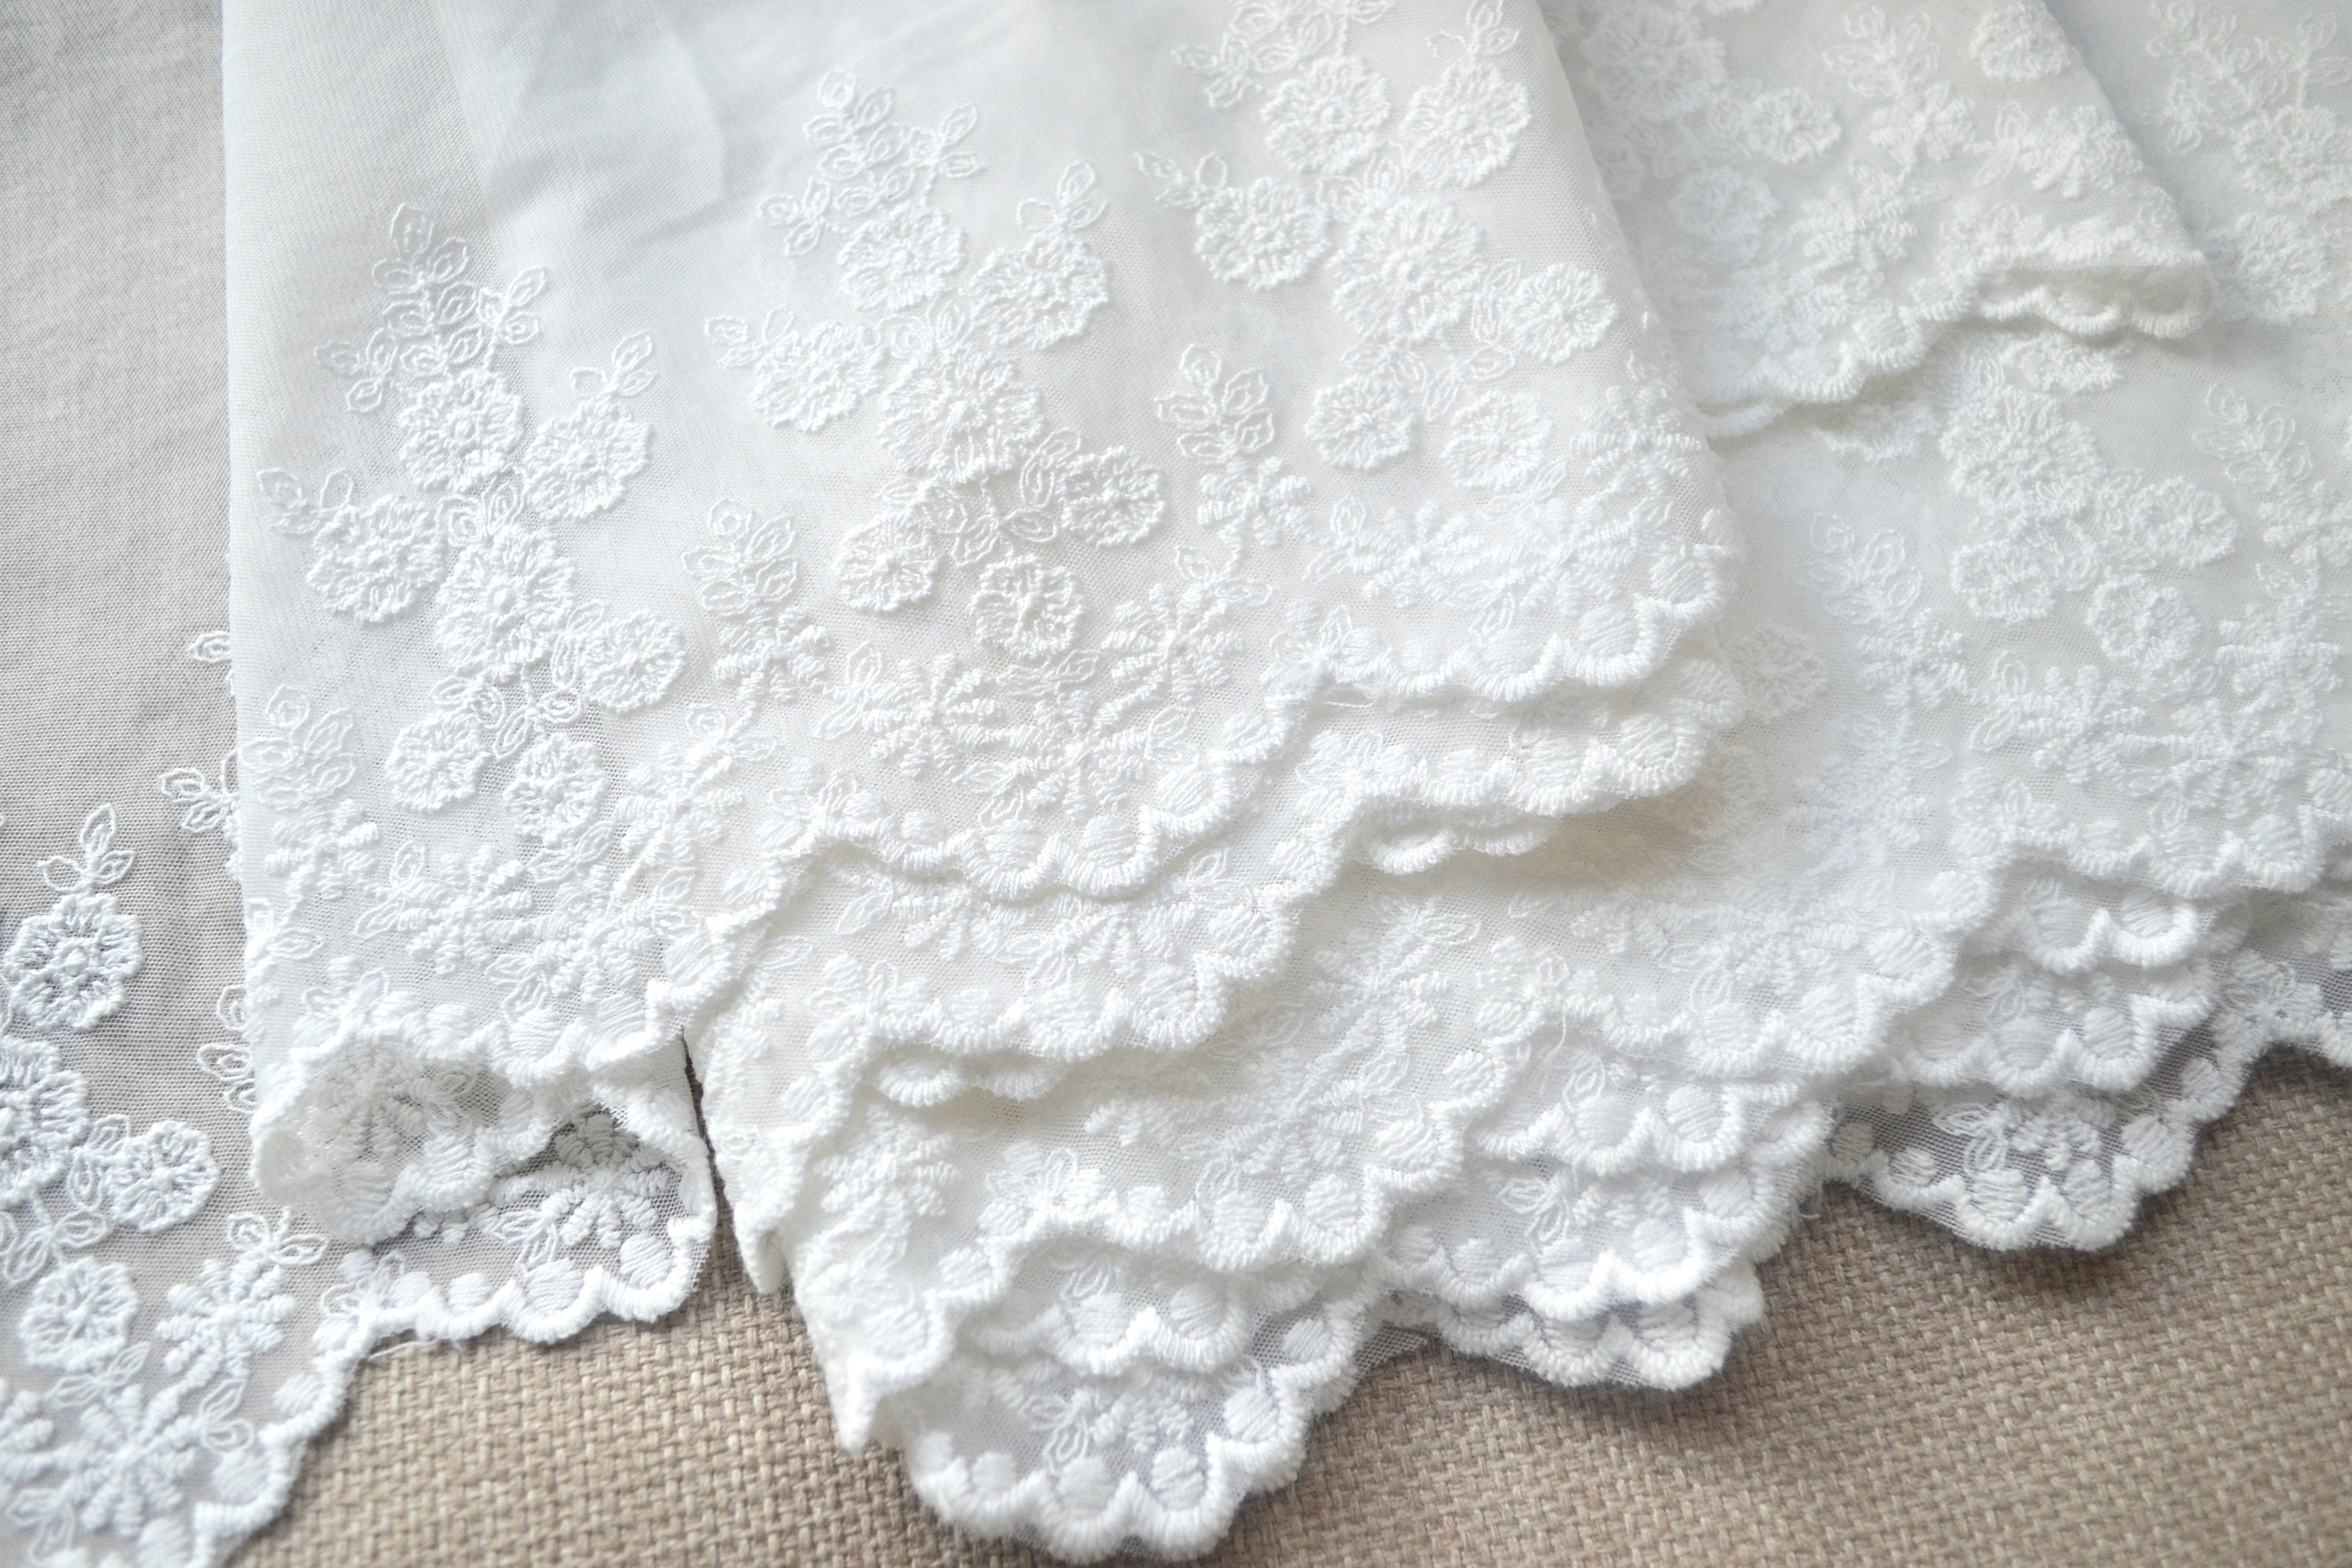 White Embroidered Lace Fabric, Bridal Lace, Wedding Lace, White Tulle Net  Lace, Vintage Lace Fabric, Shabby Chic Lace, Junk Journal Supply 